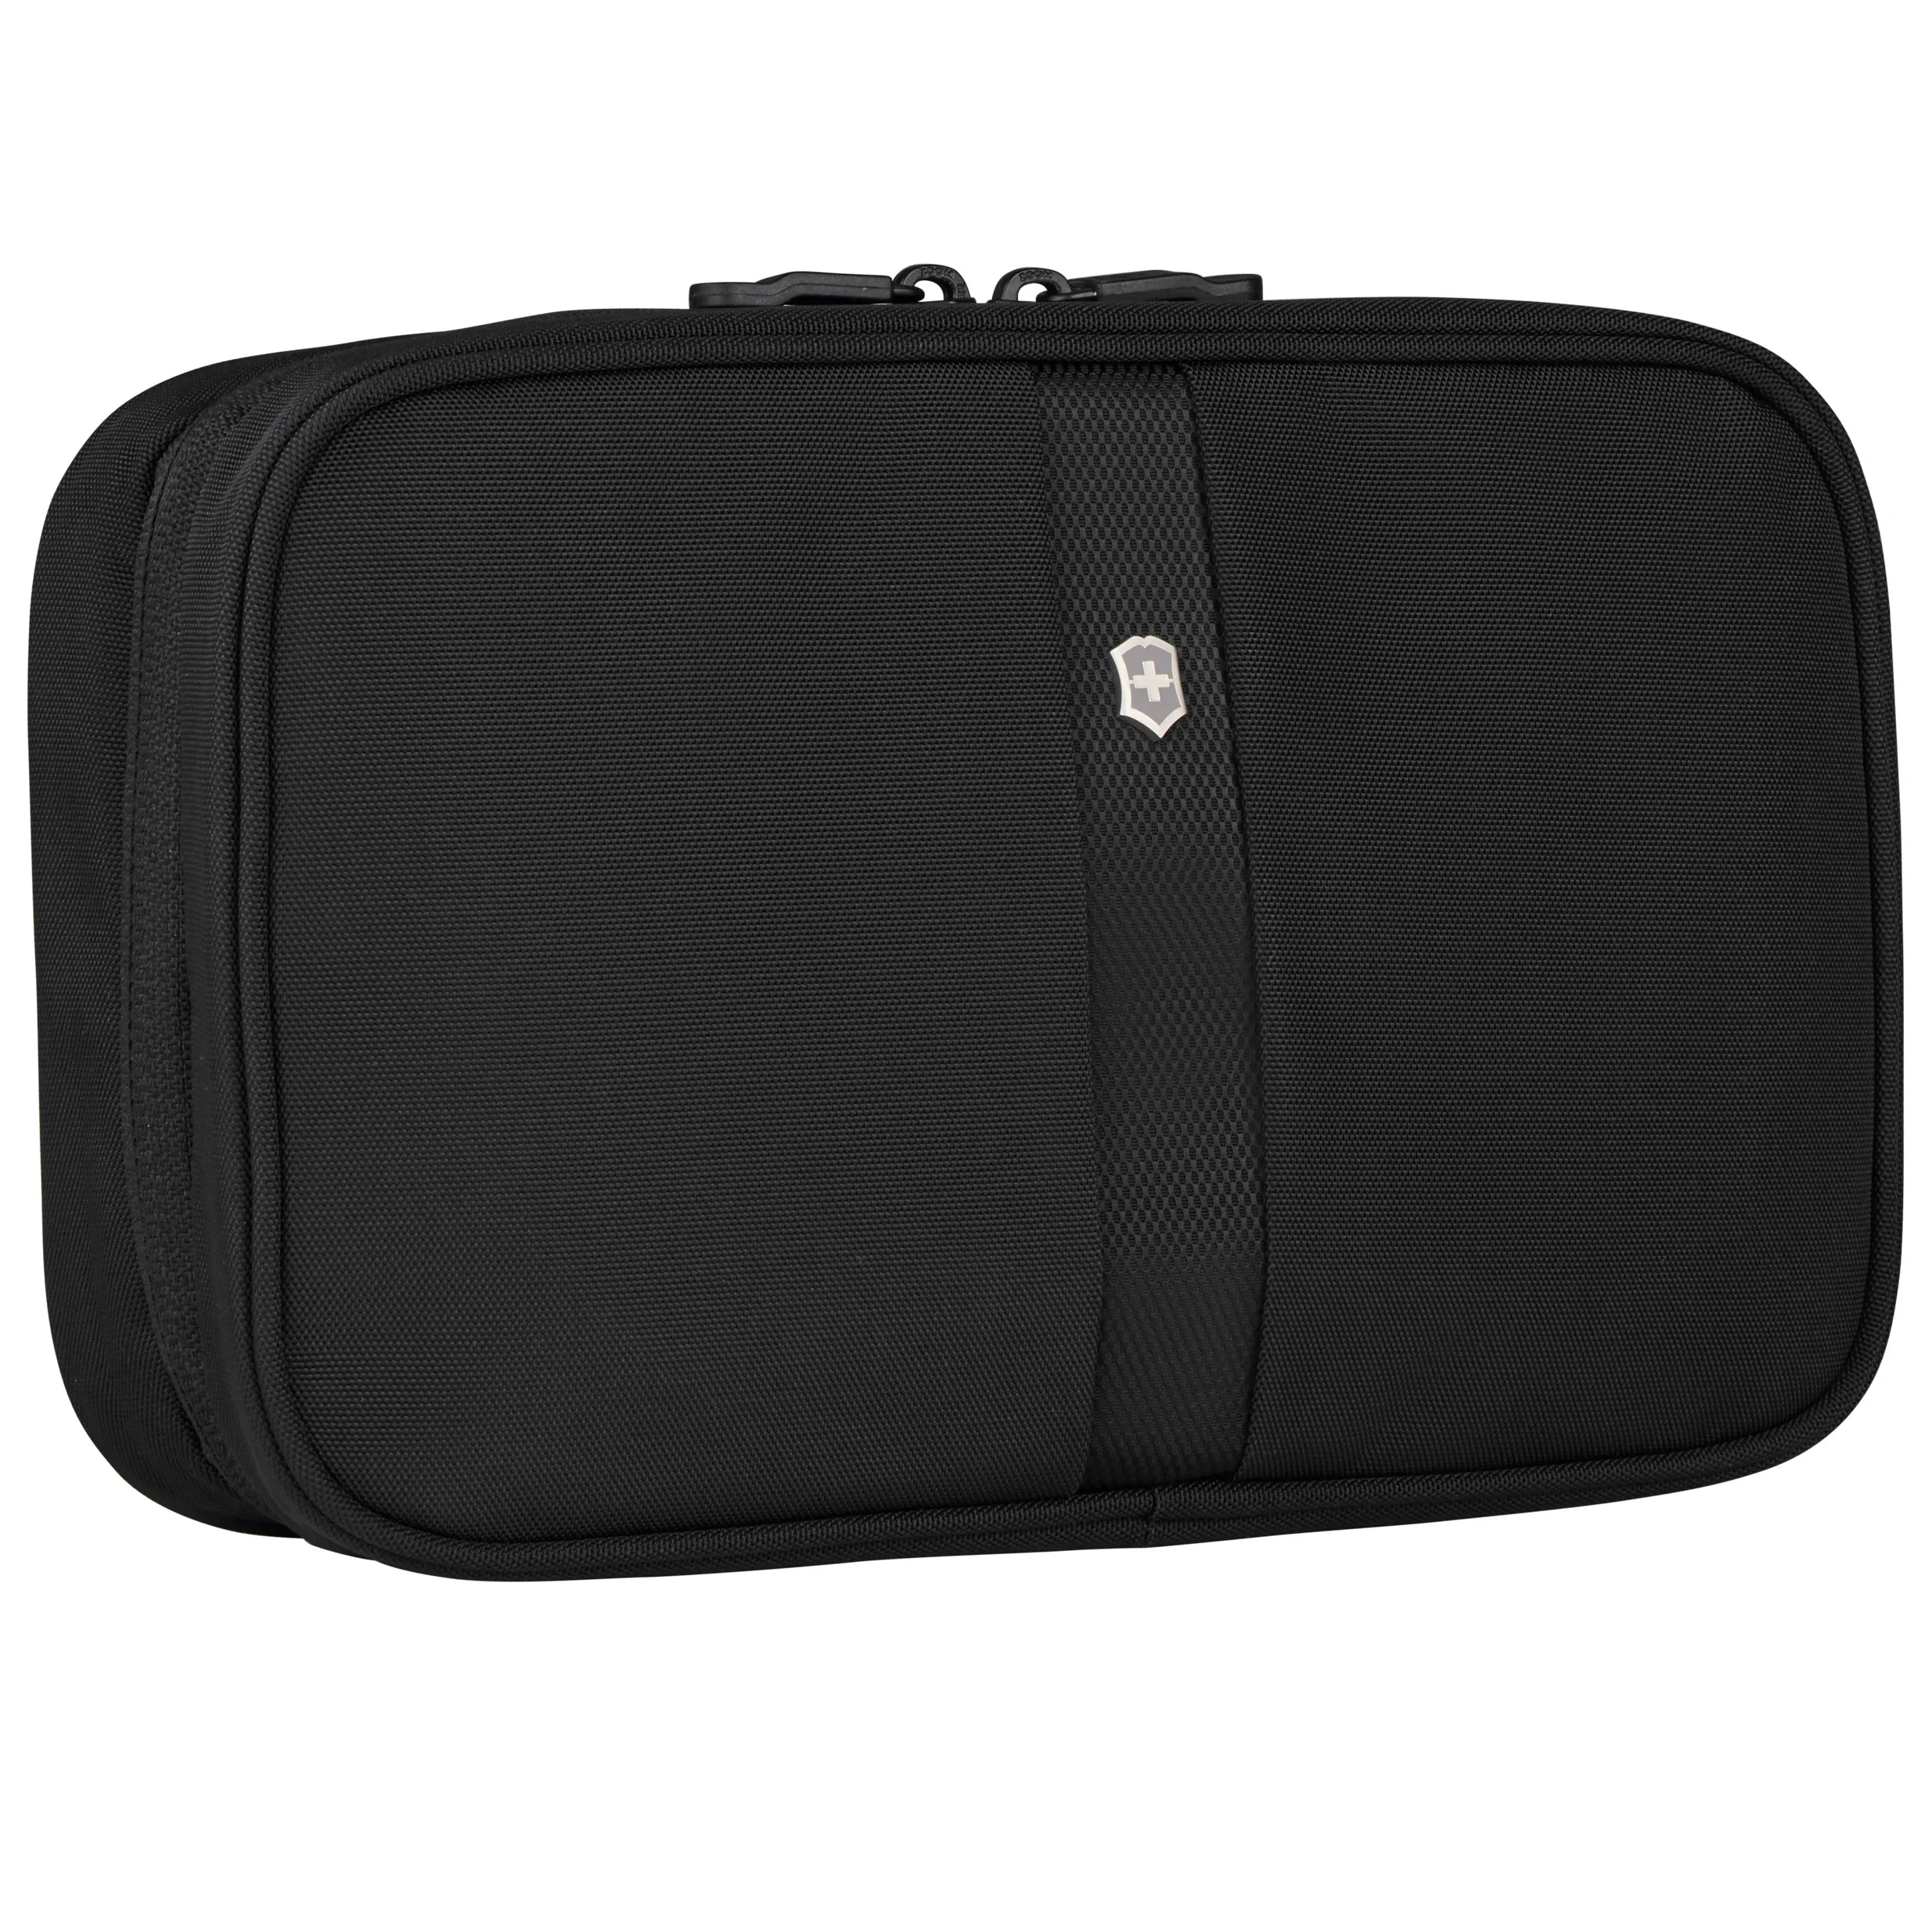 Victorinox suitcases & travel bags - More than just luggage